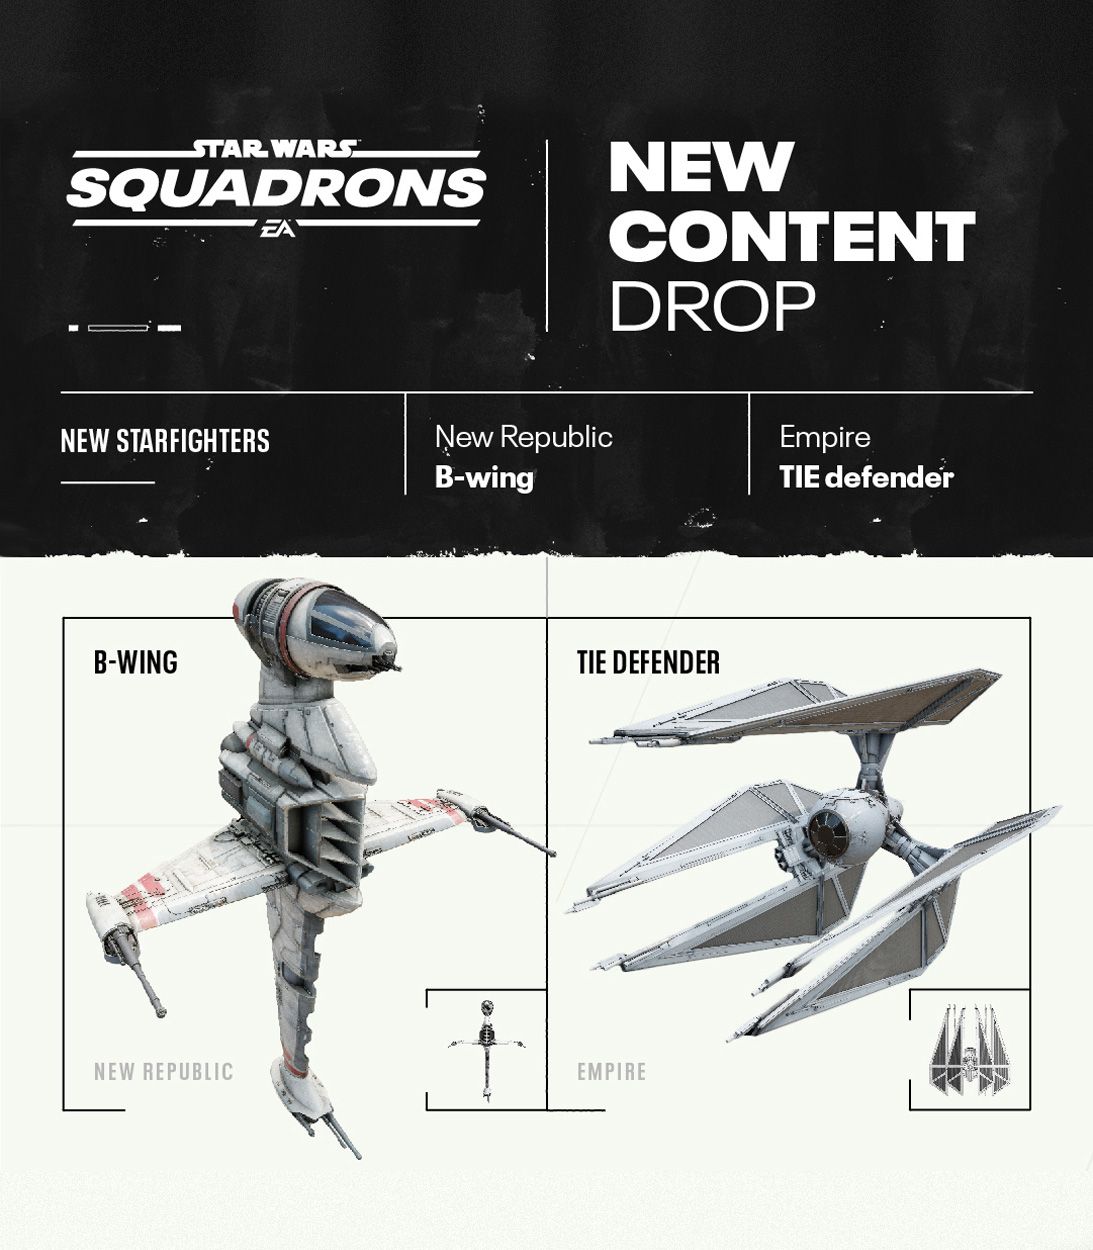 TLDR Star Wars Squadrons Ships Update